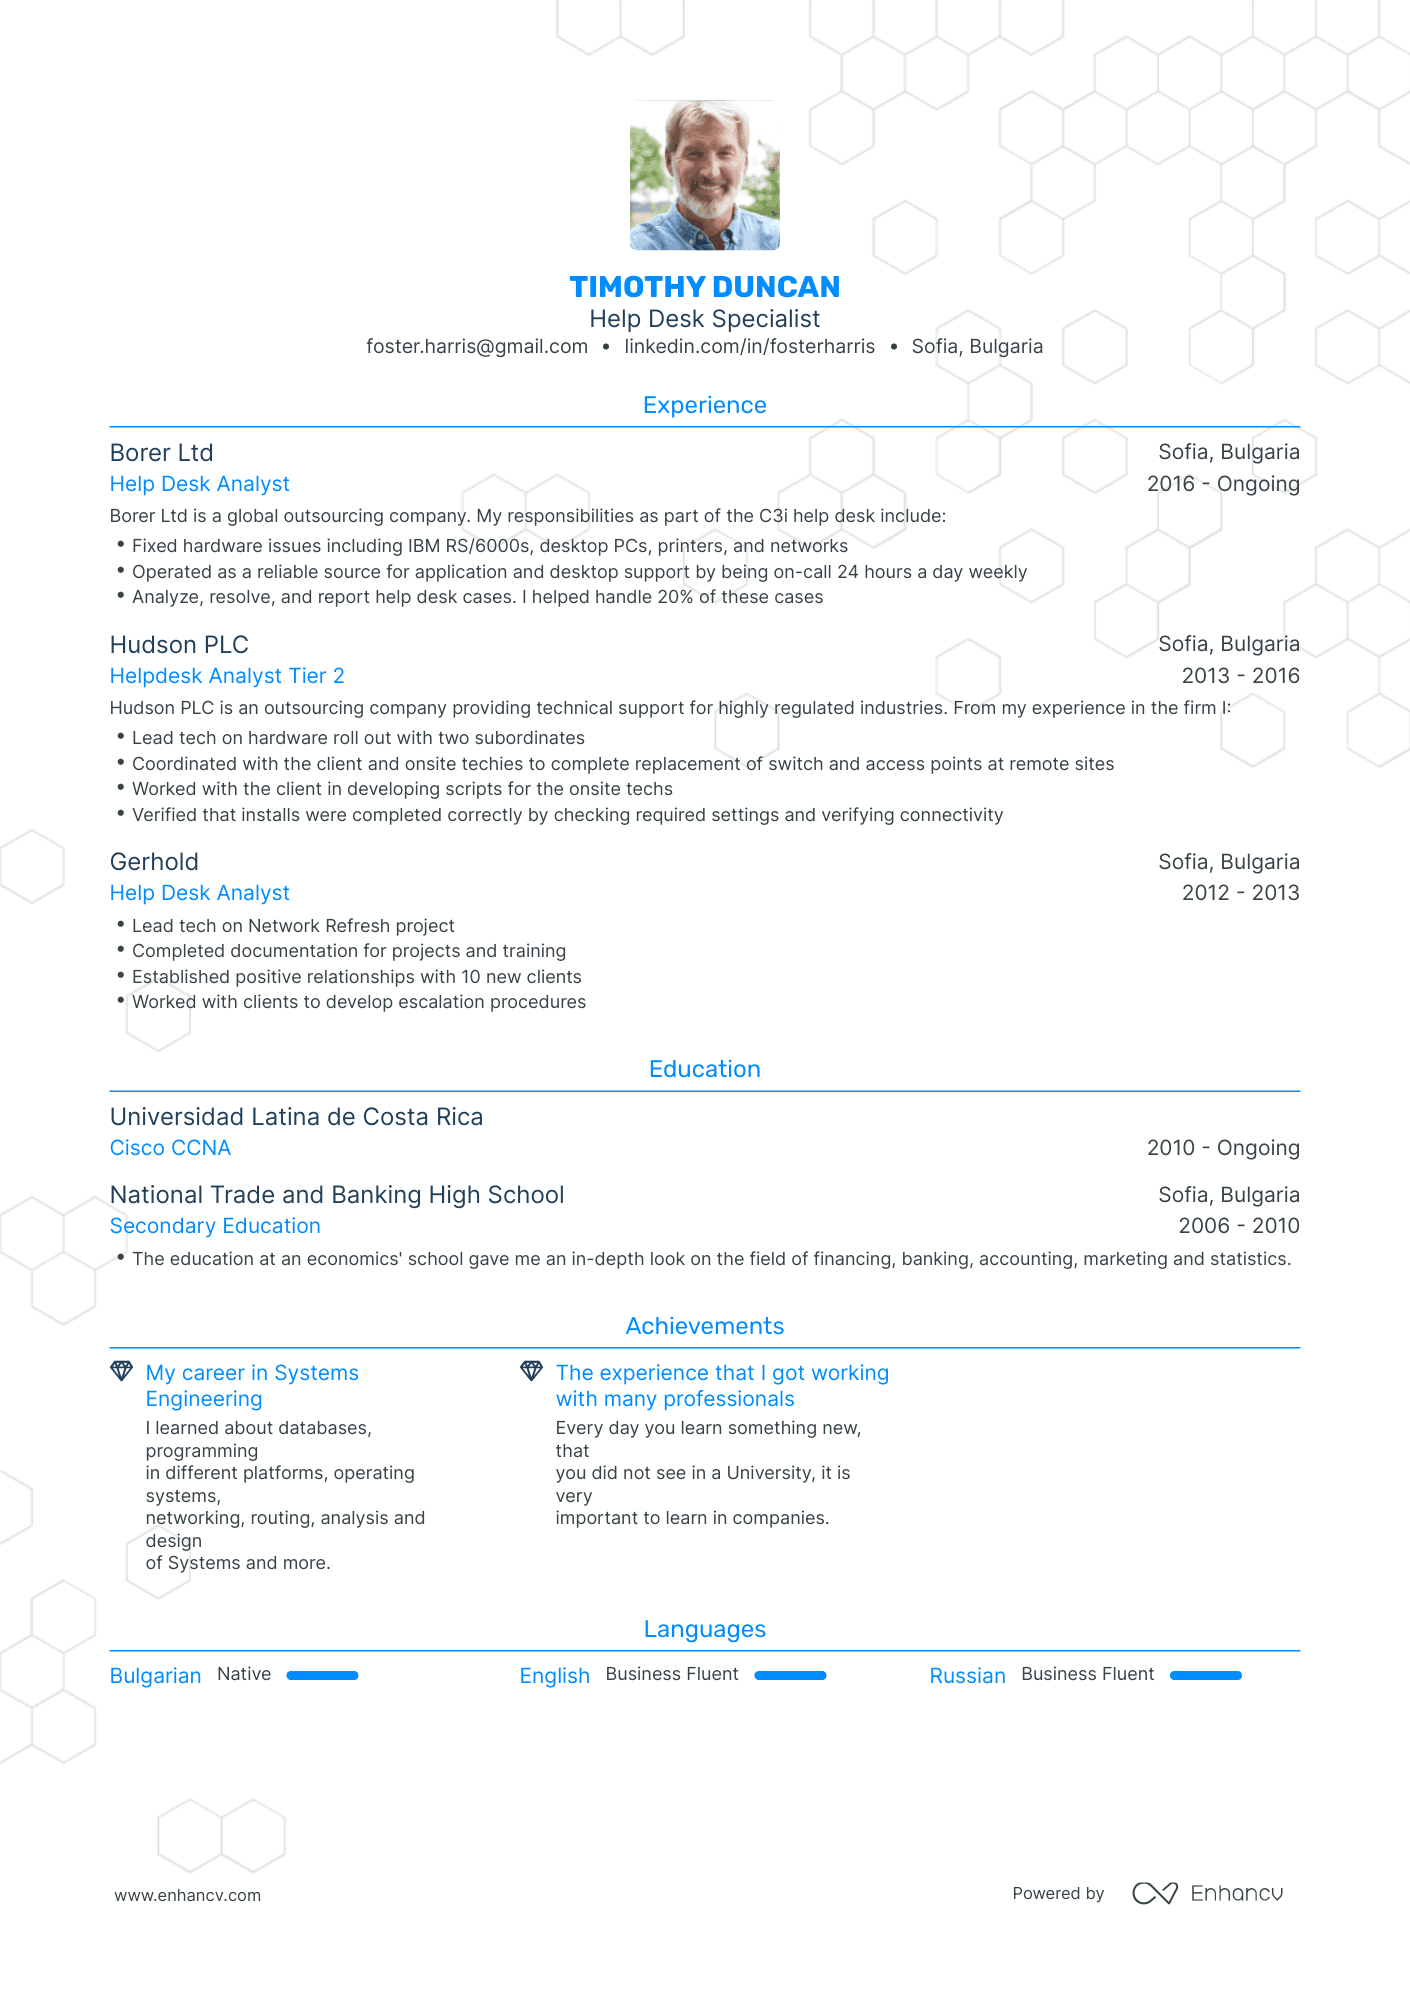 Traditional Help Desk Resume Template